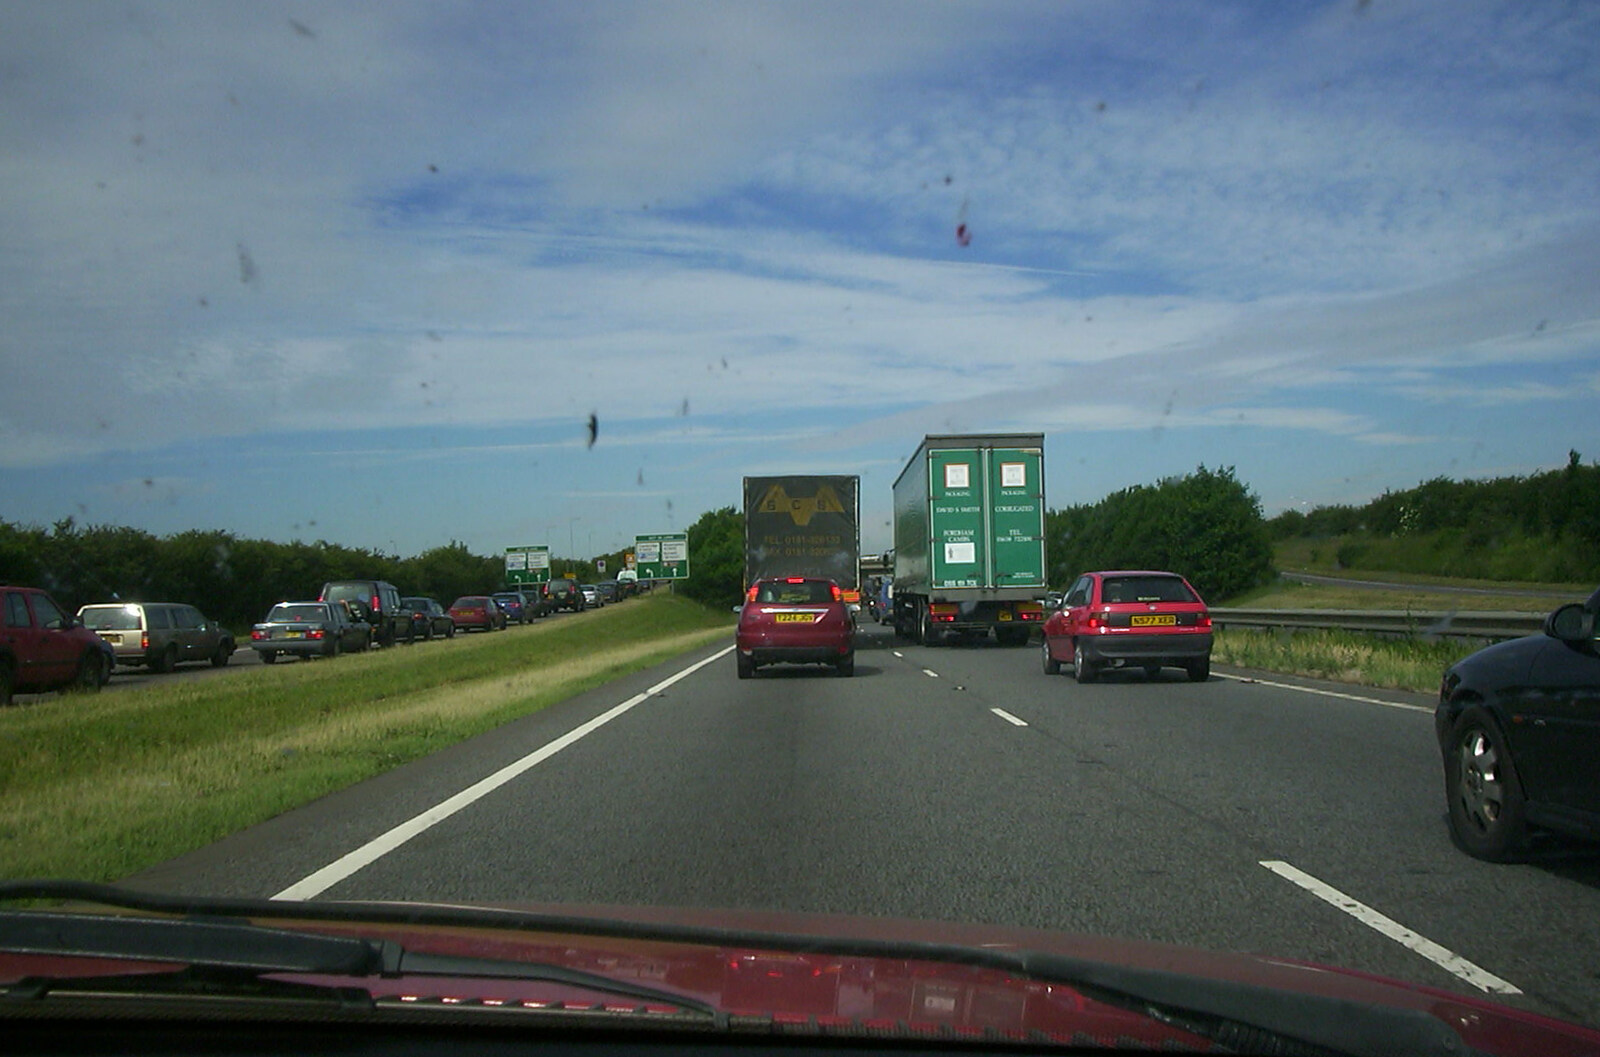 Spammy's Barbeque and A Summer Miscellany - 1st June 2002: The A14 is hosed at the Newmarket Road exit near Cambridge